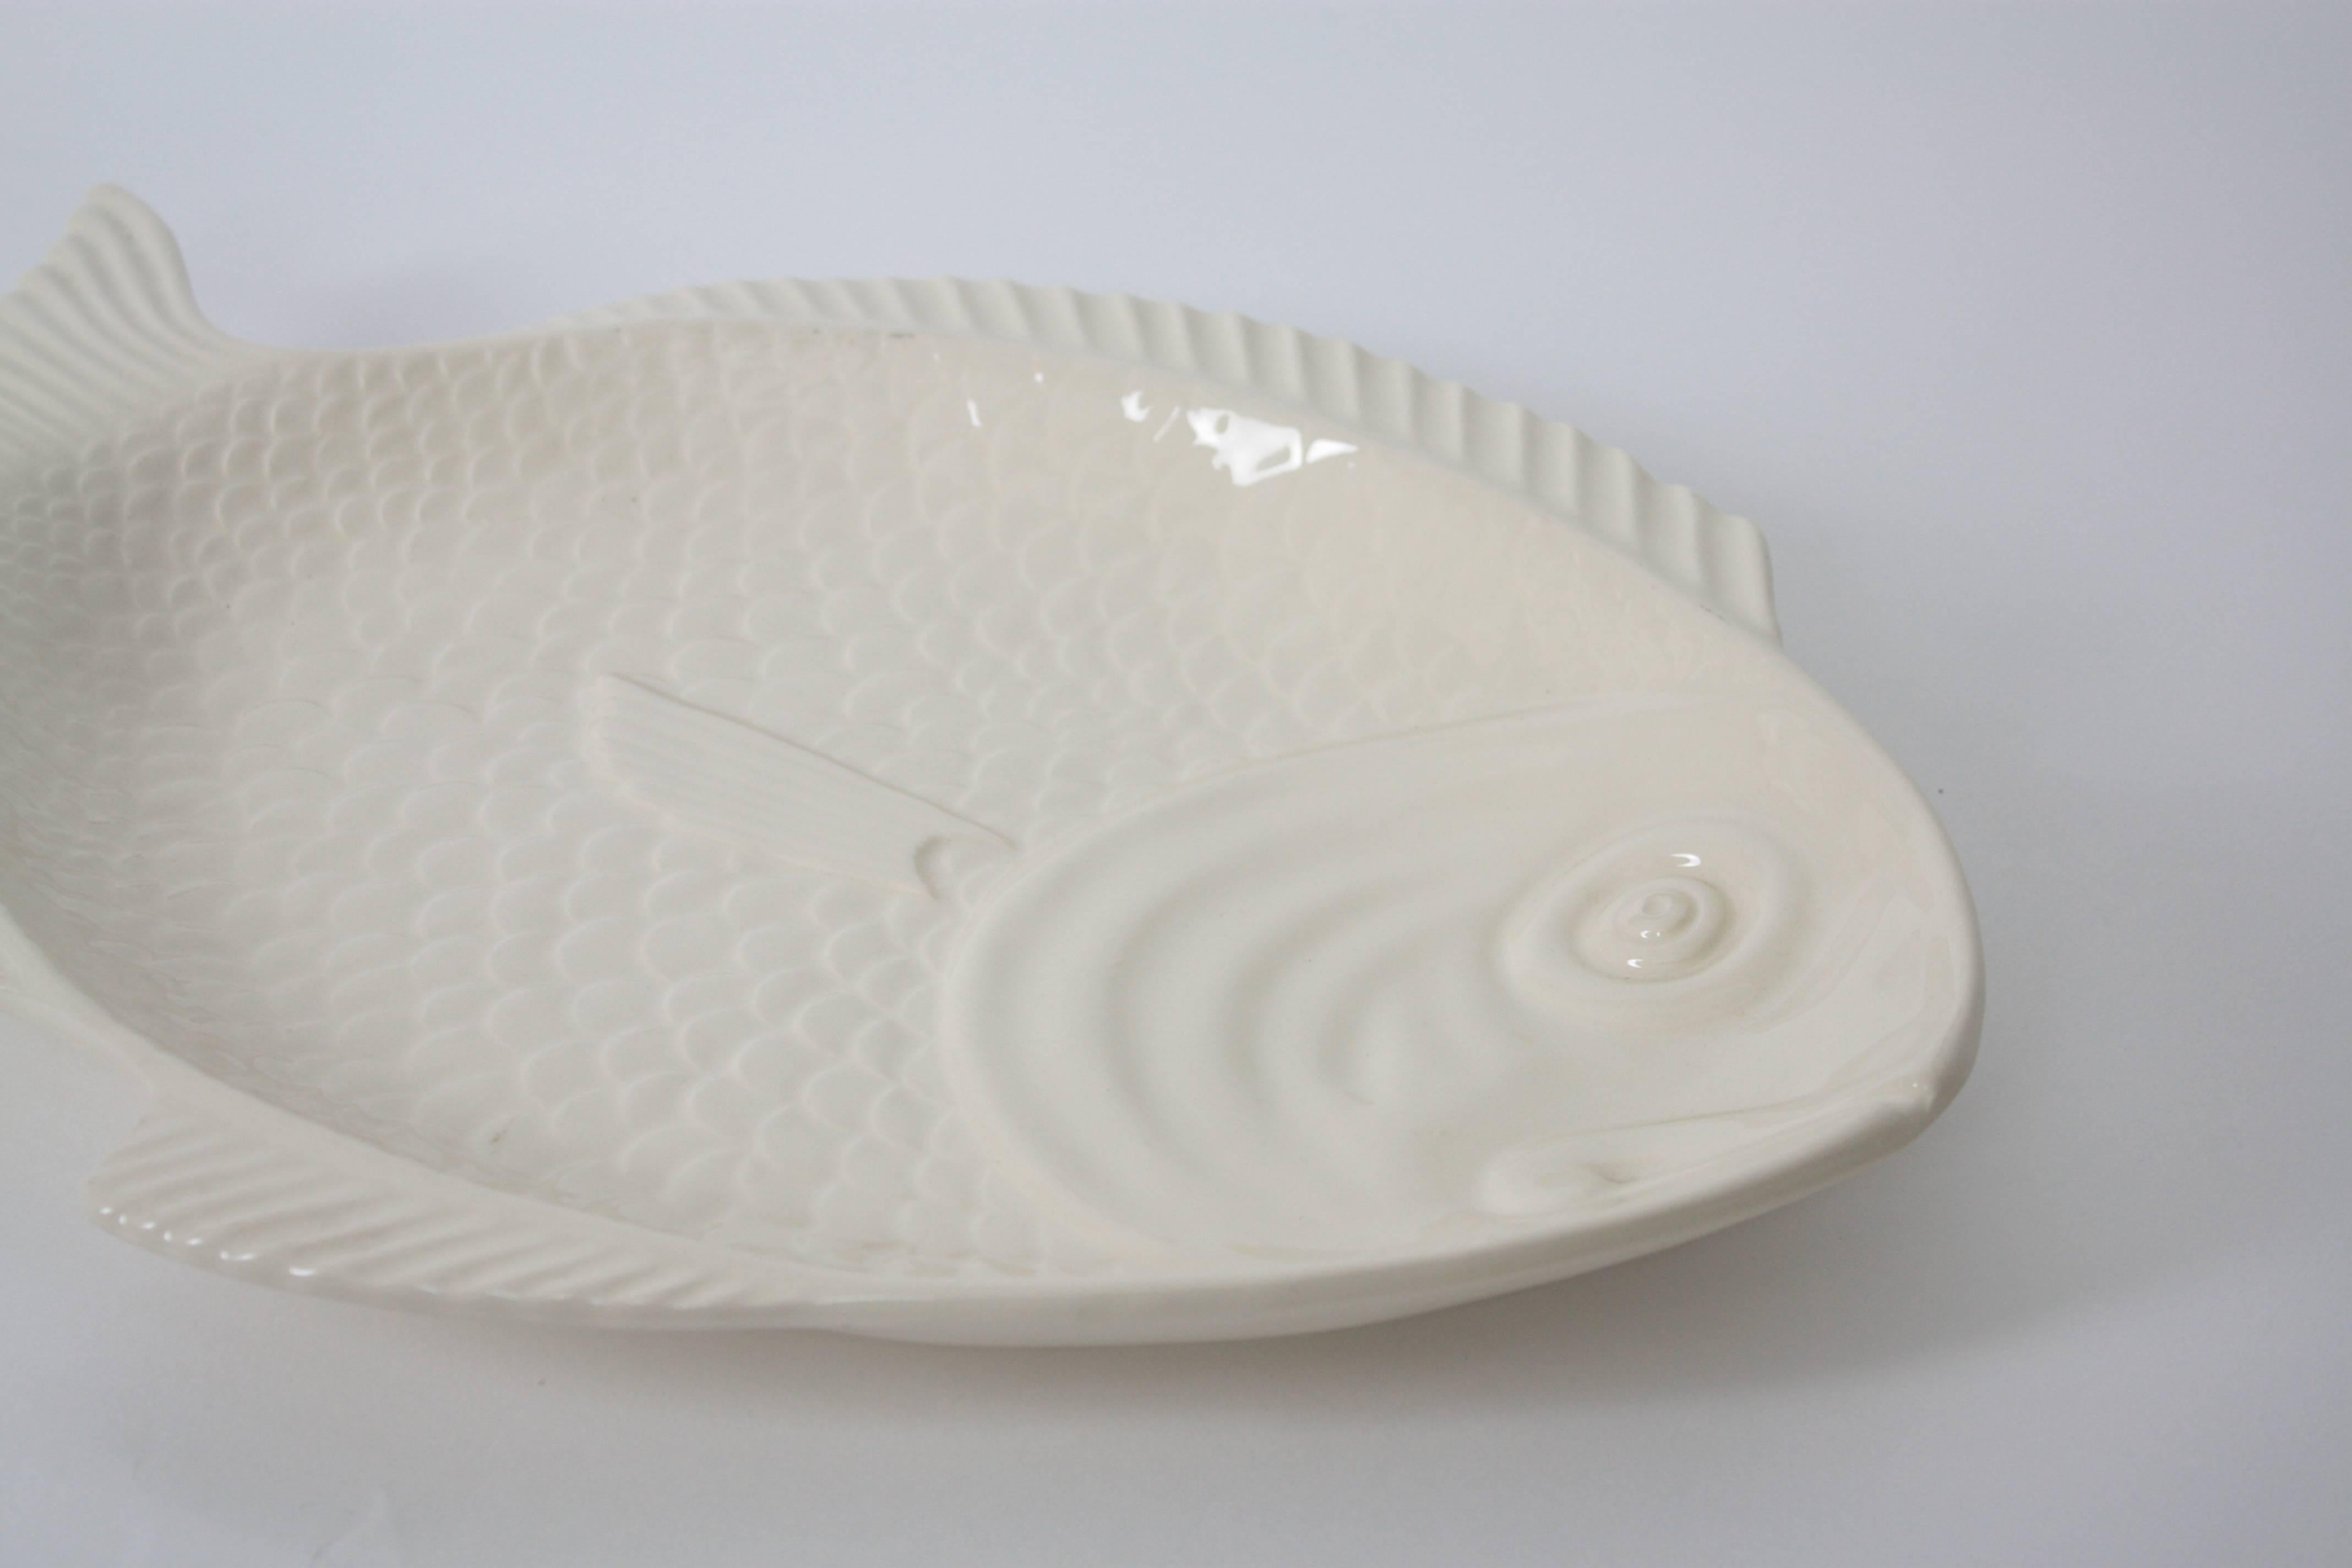 A large glazed ceramic platter, Portugal, circa 1960.
Useful as fish platter, for decorative purposes or wall decoration.

The platter is in excellent condition and has a trade mark from Portugal at the back.

Available other pieces in this